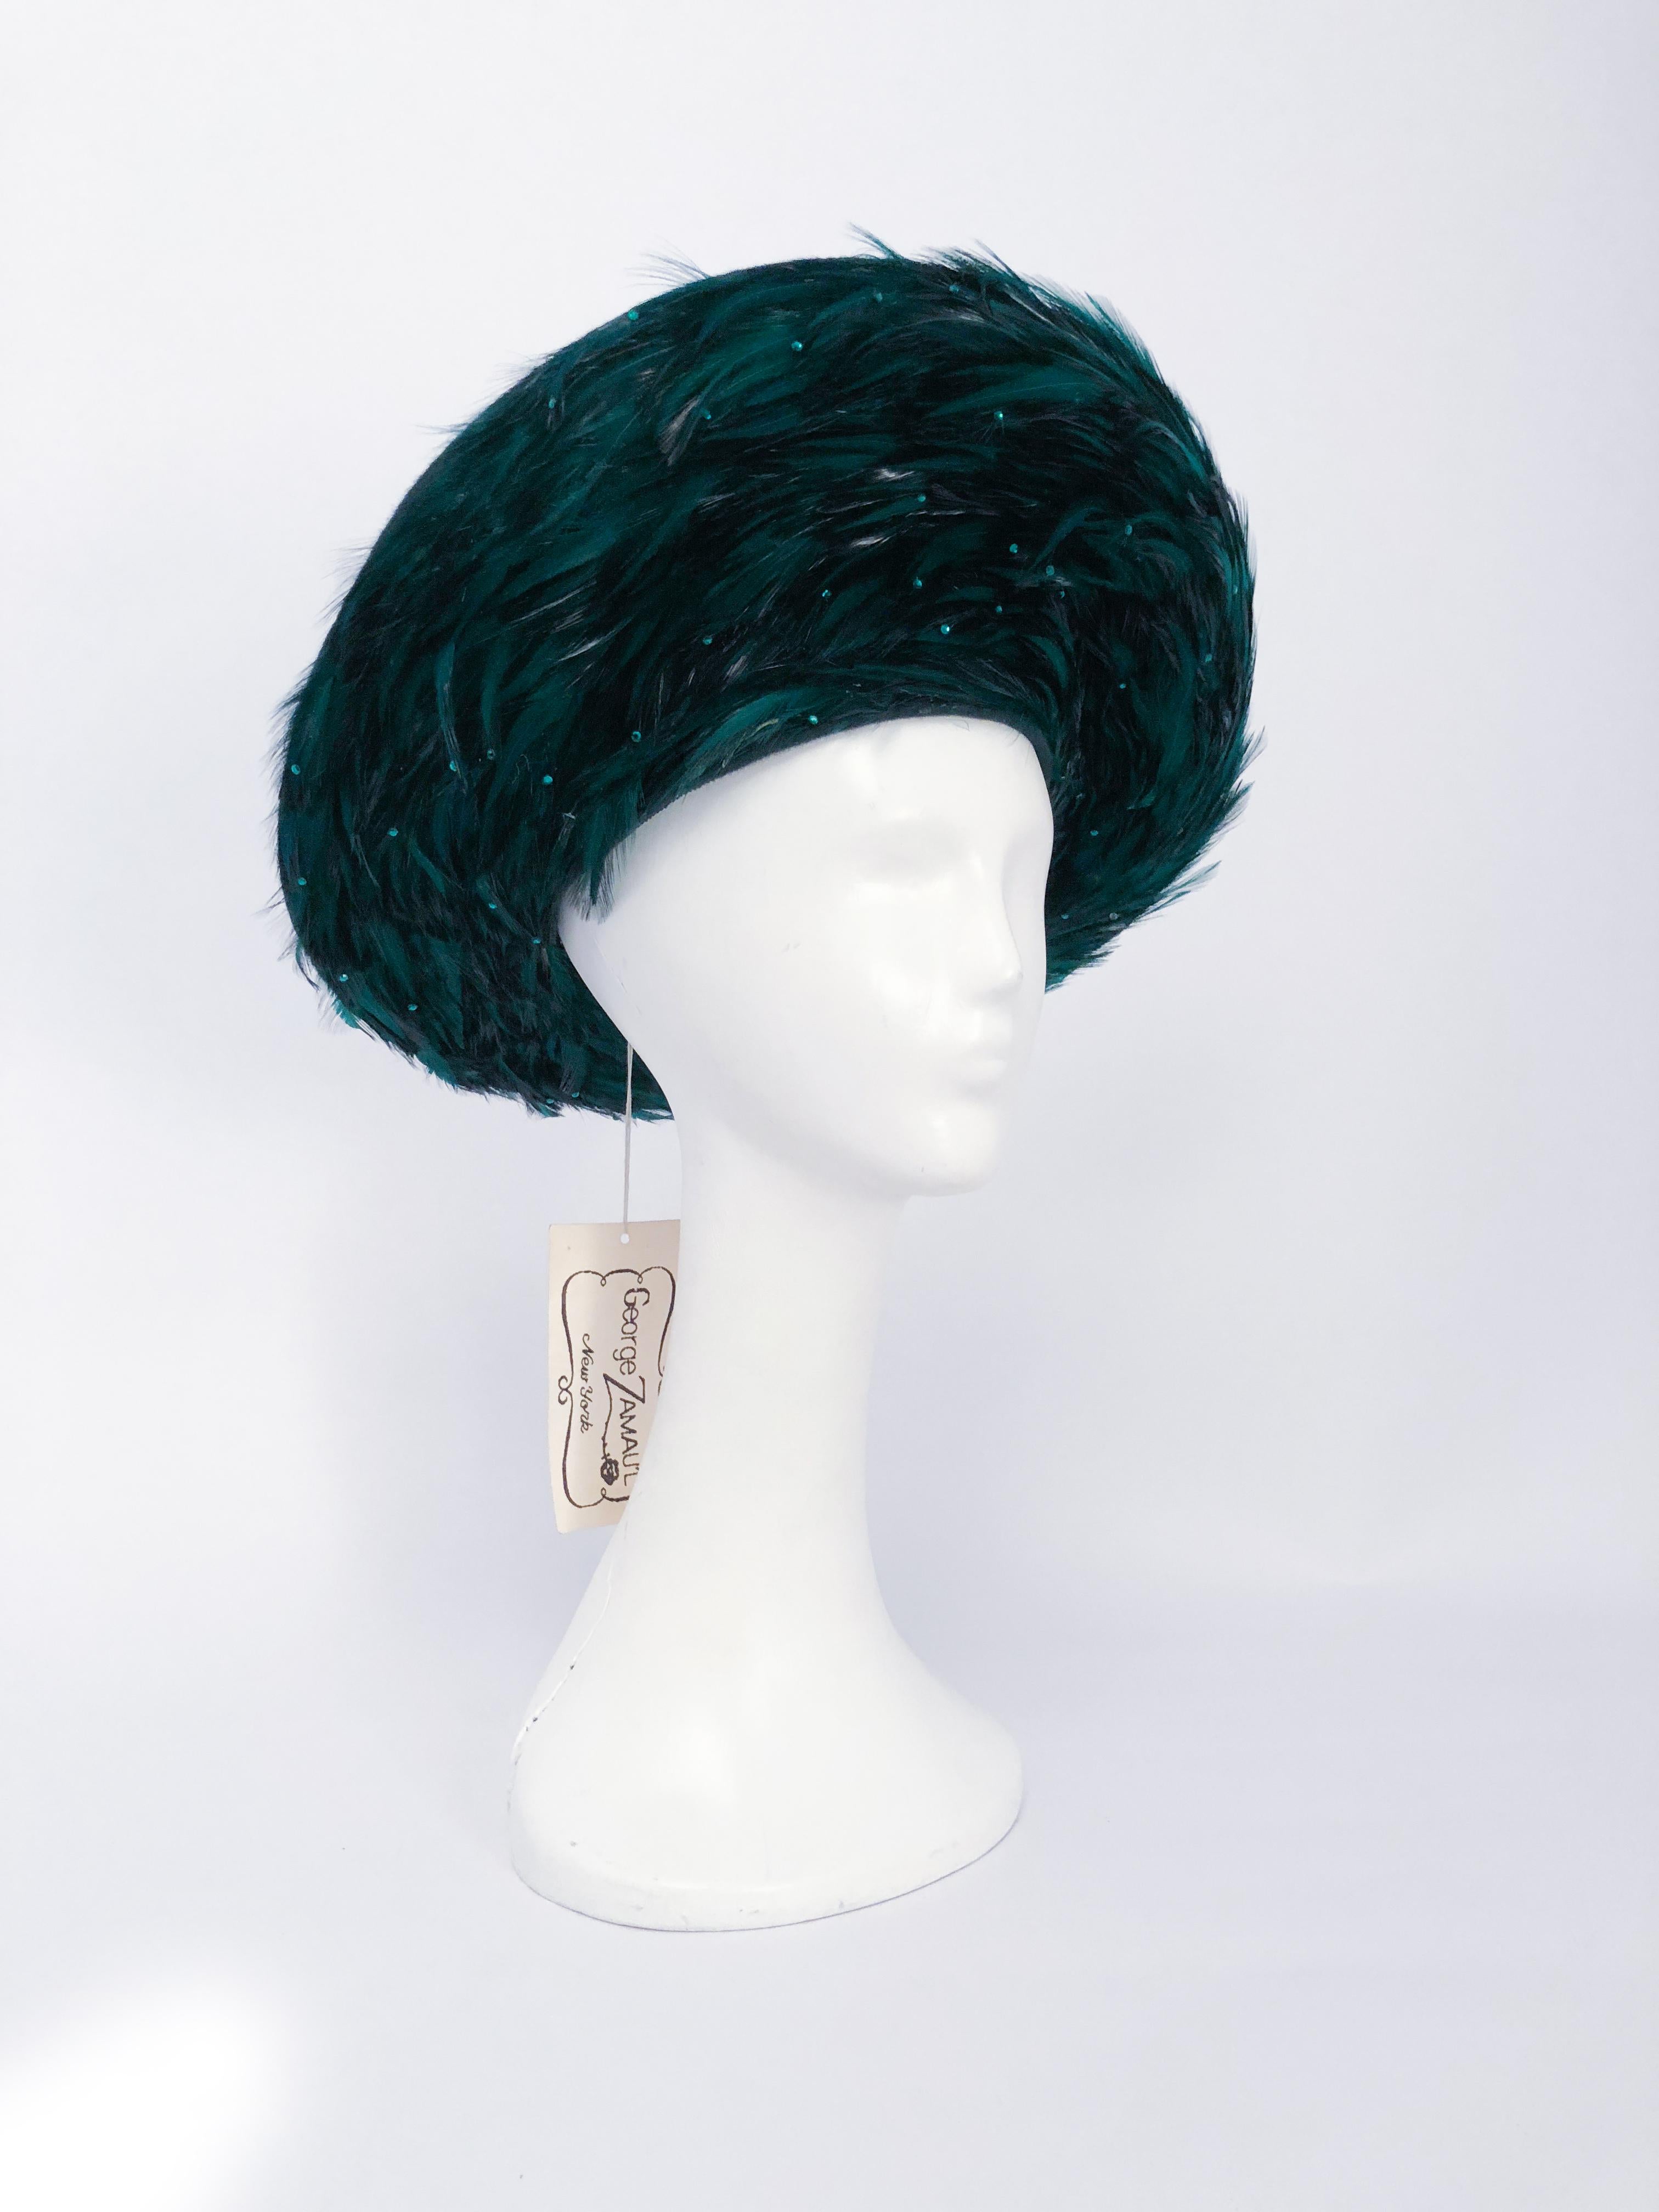 1980s George Zamau'l Emerald Hat with Feathered Brim. Emerald Green beaver felt hat with rhinestone jeweled black and green feathers on the underside of the brim. This hat is unworn and has the original tags attached. 23 inch circumference and could